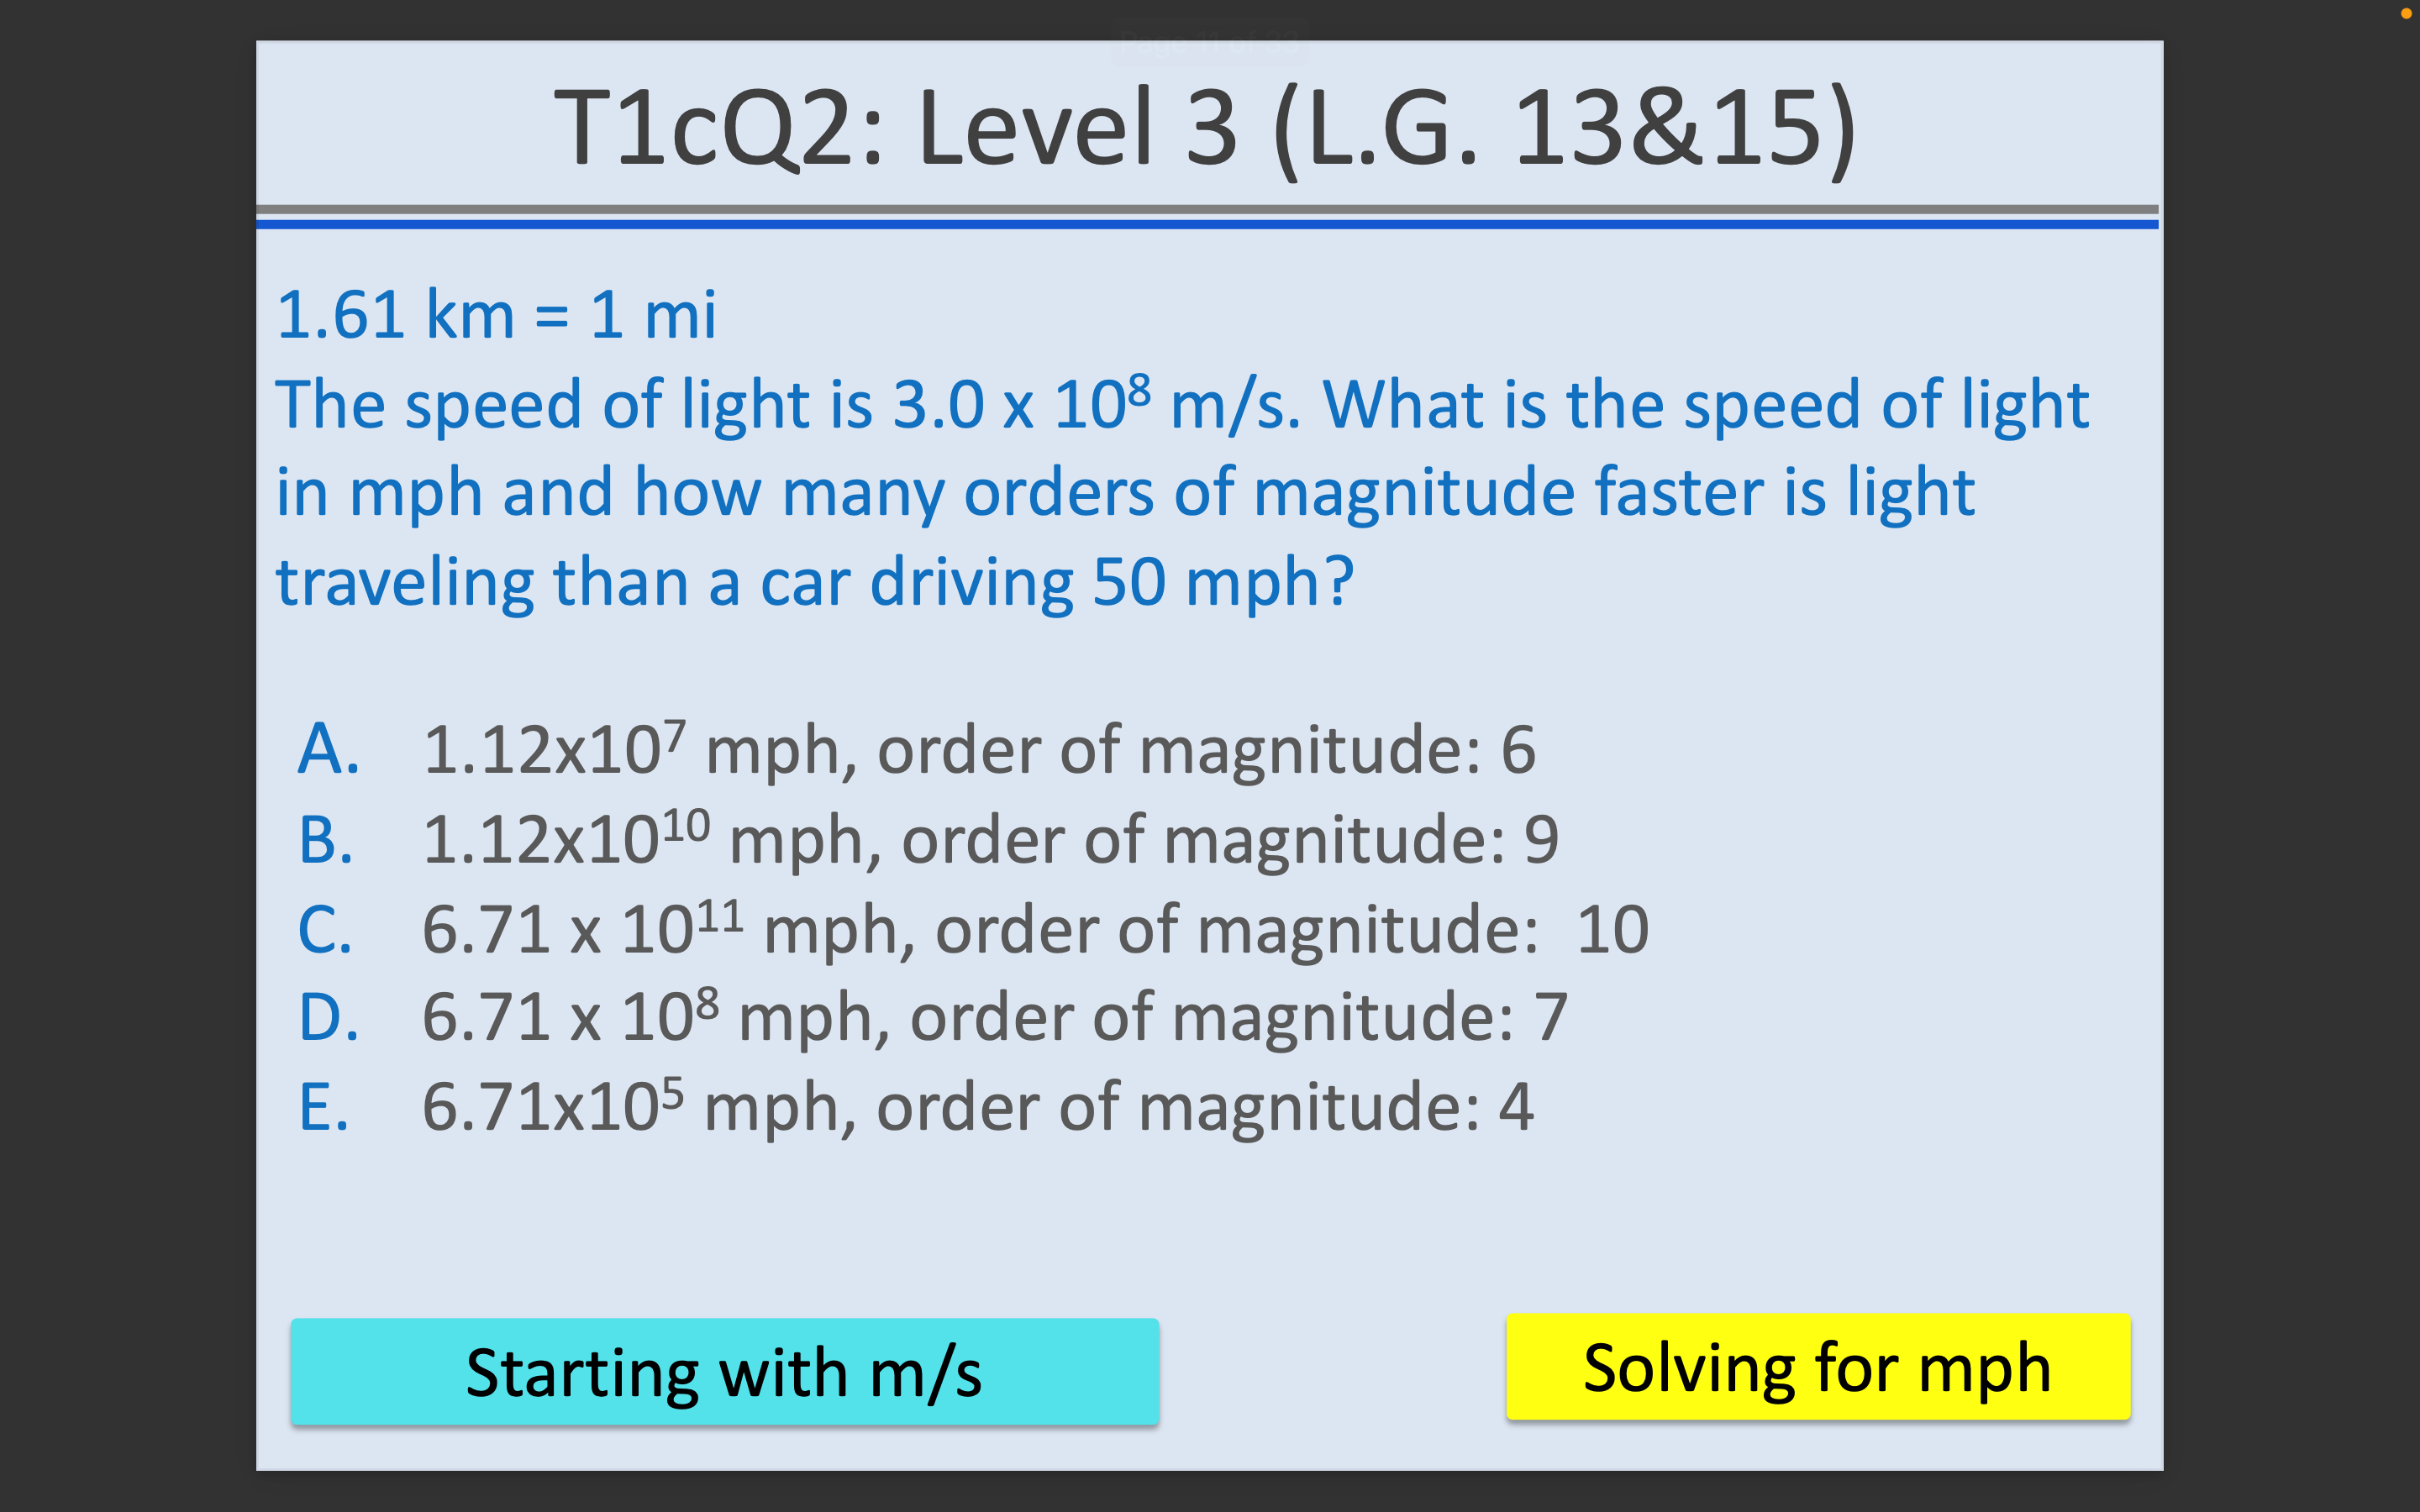 What Is the Speed of Light?